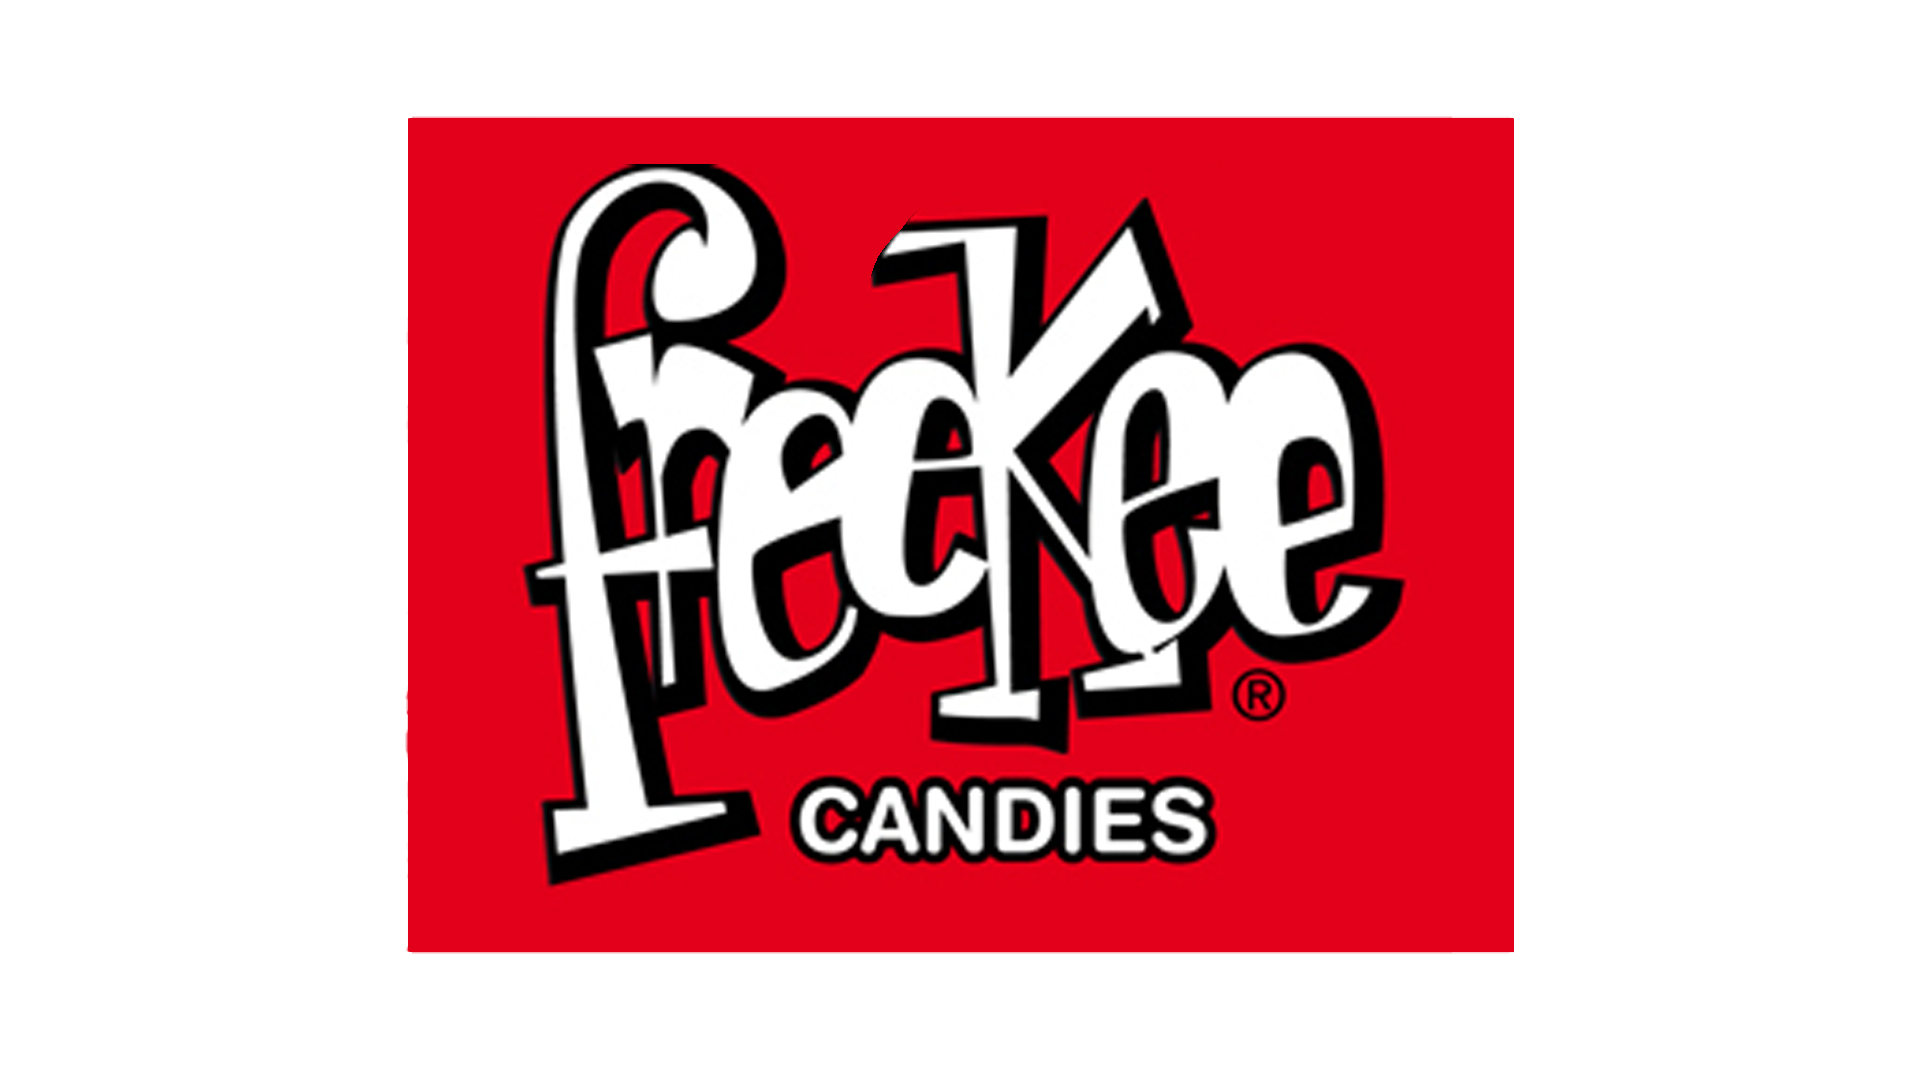 Marque: FREEKEE